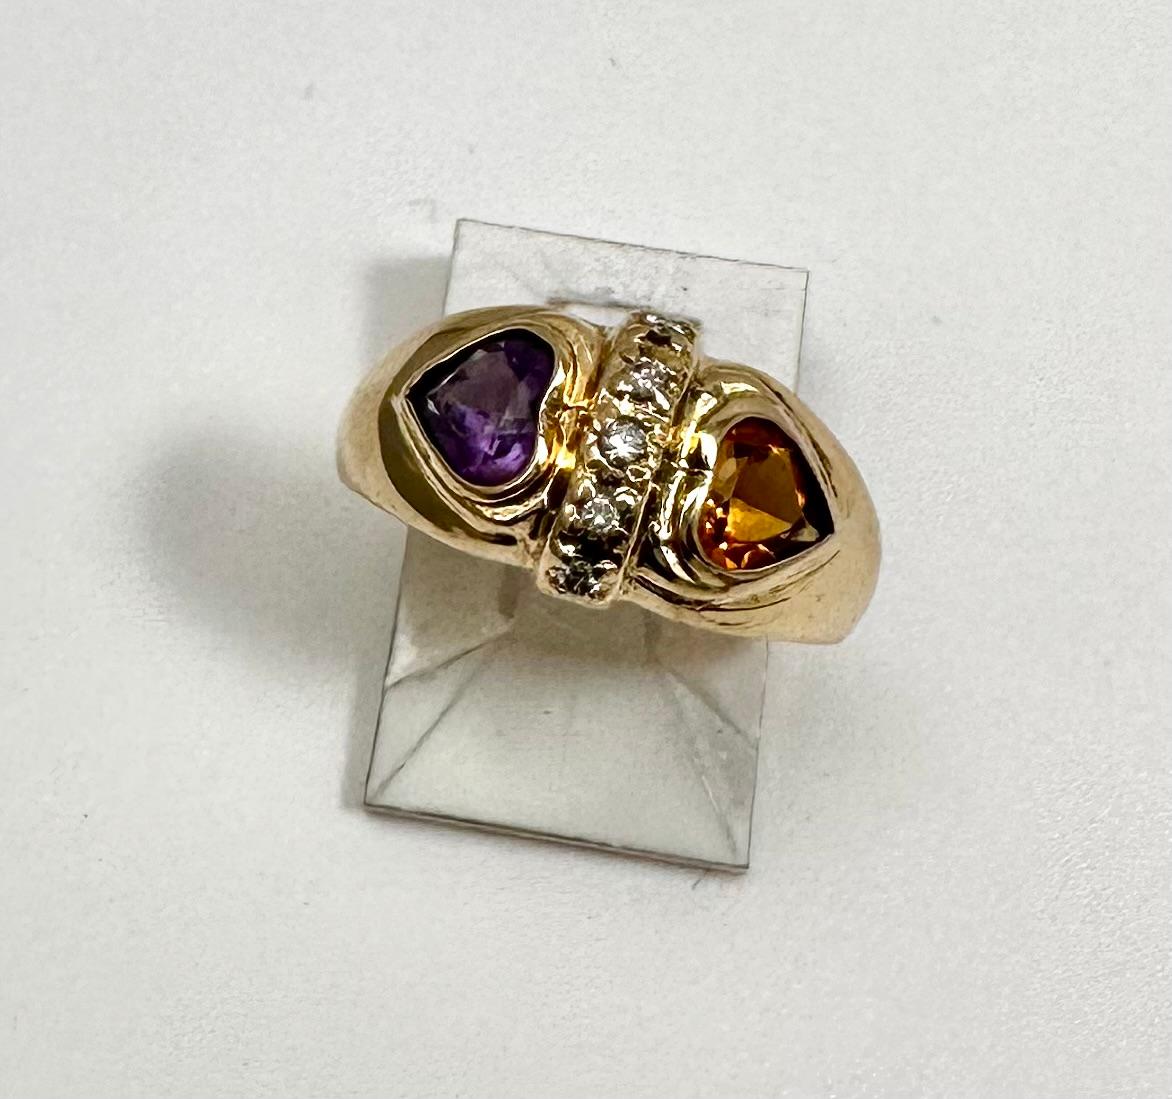 14k Yellow Gold 5mm Heart Shaped Citrine and Amethyst Diamond Ring  Size 4 1/2
Width of band approx 9.4mm

Often viewed as a stone of peace, some believe amethyst's calming presence produces soothing dreams by bringing the dreamer more in tune with